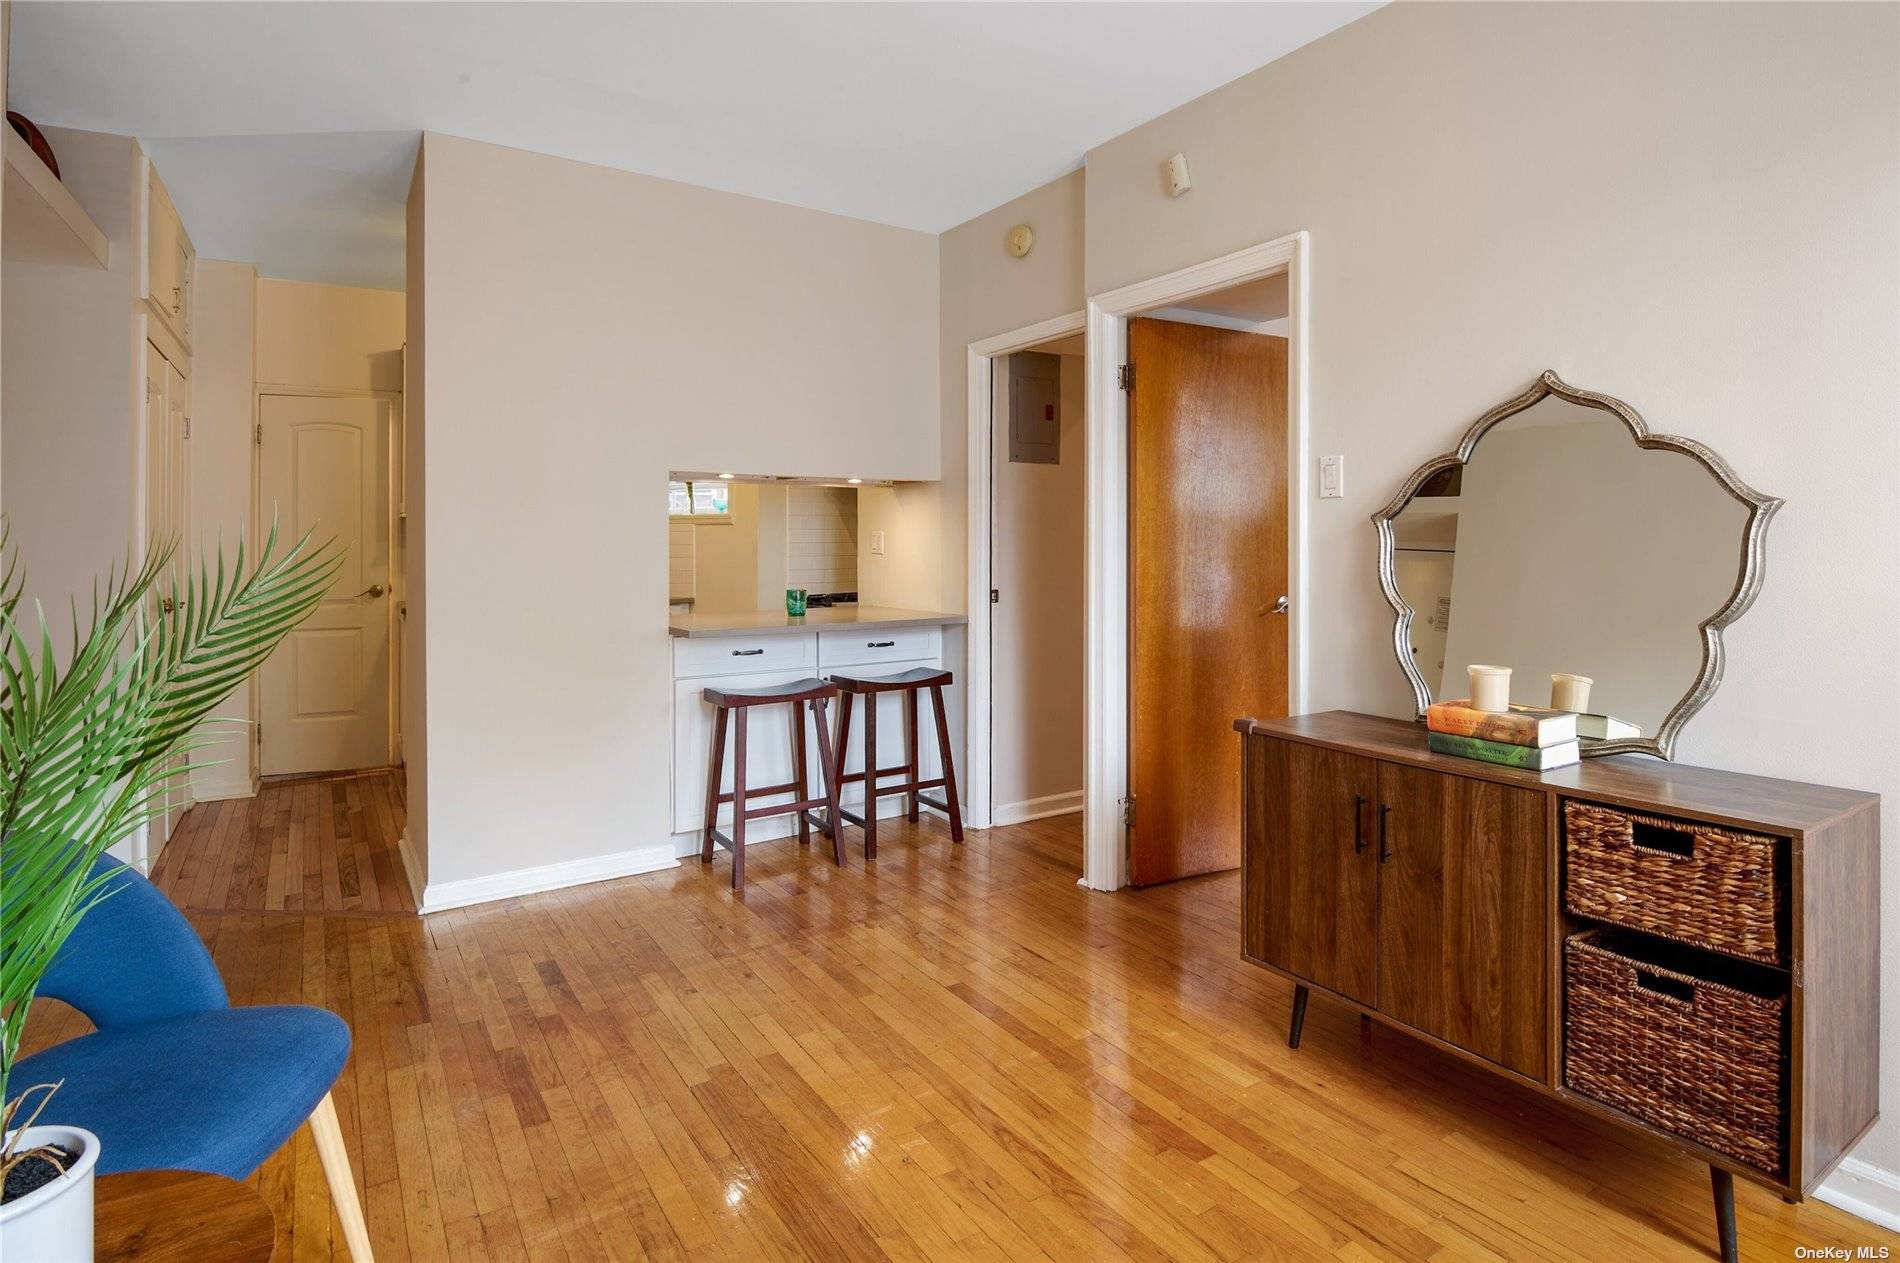 Park Slope This updated 2 bedroom, 1 bath unit is located on the building's first floor and only two blocks away from Prospect Park.